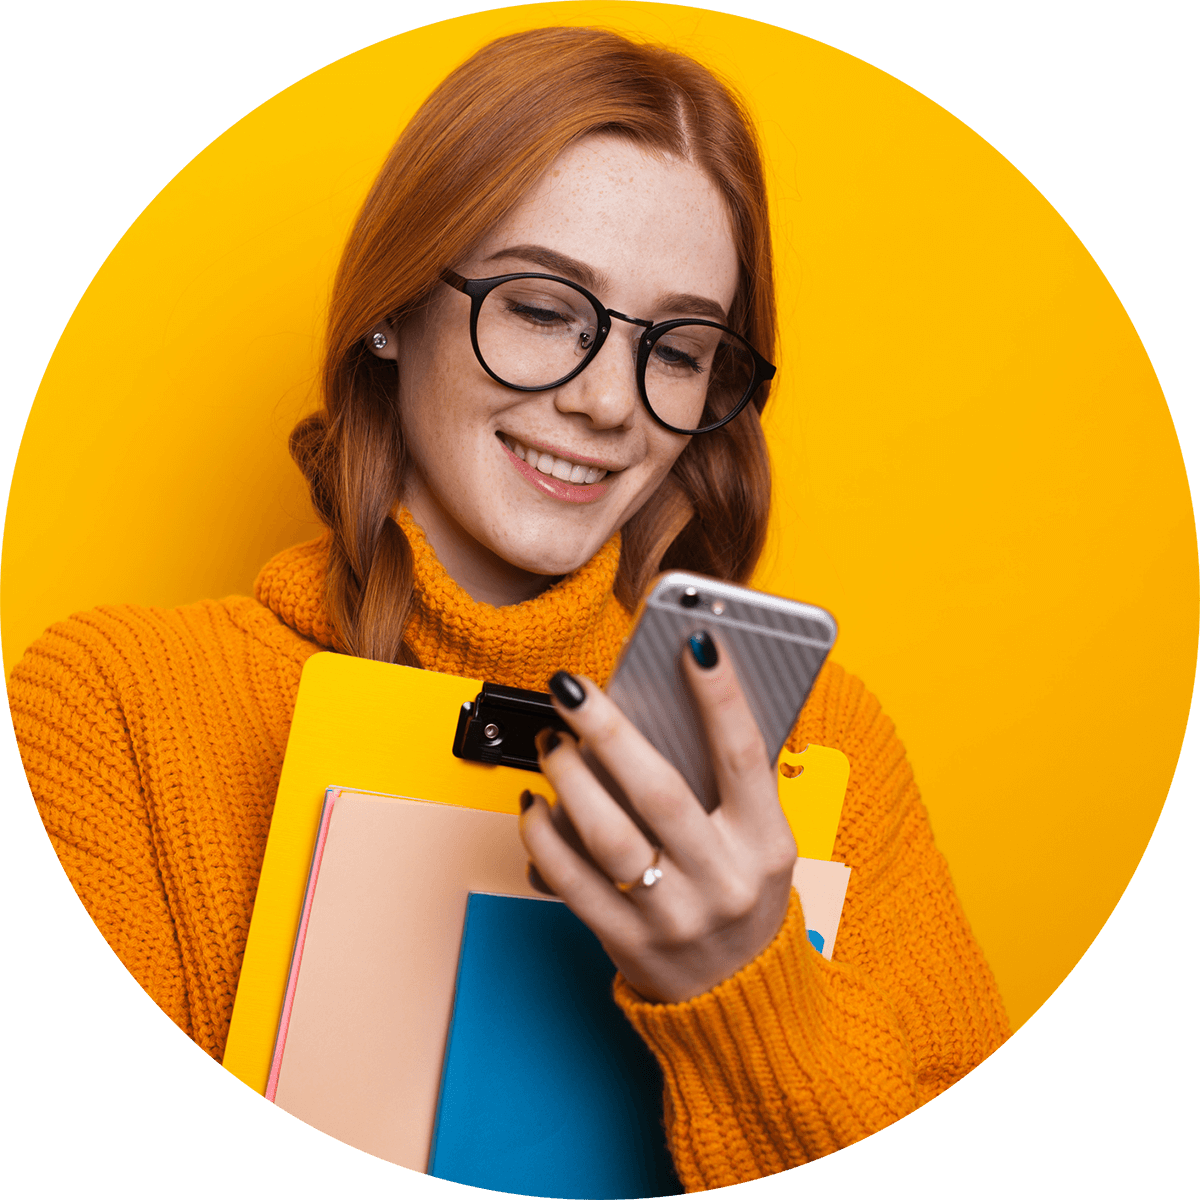 Redhead student with black glasses smiling at phone